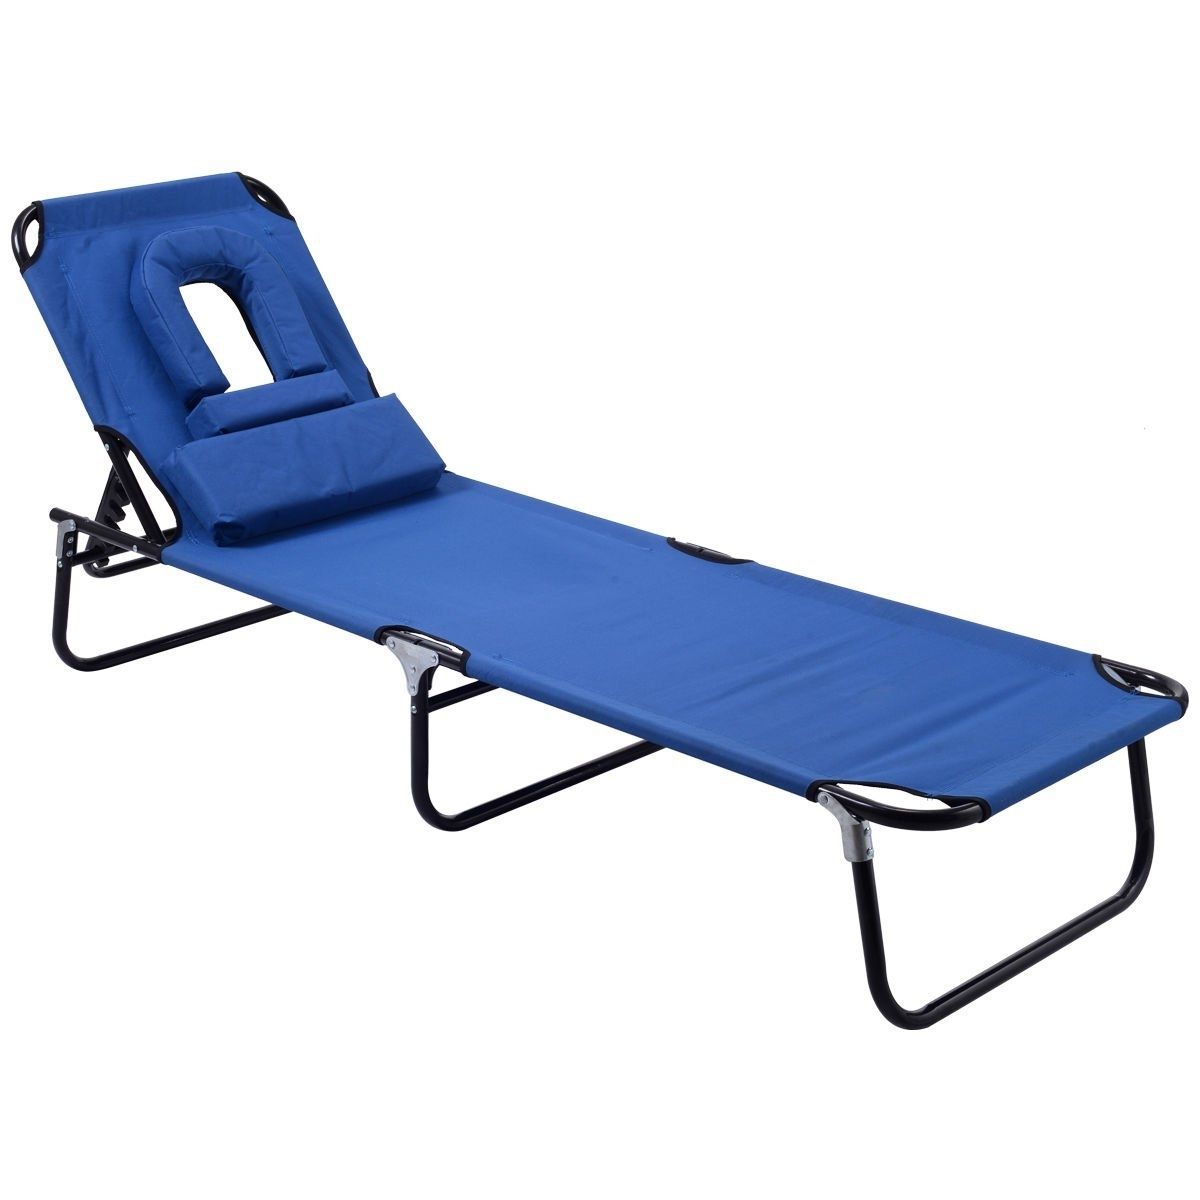 Most Recent Amazon: Goplus Folding Chaise Lounge Chair Bed Outdoor Patio With Regard To Ostrich Chair Folding Chaise Lounges (View 11 of 15)